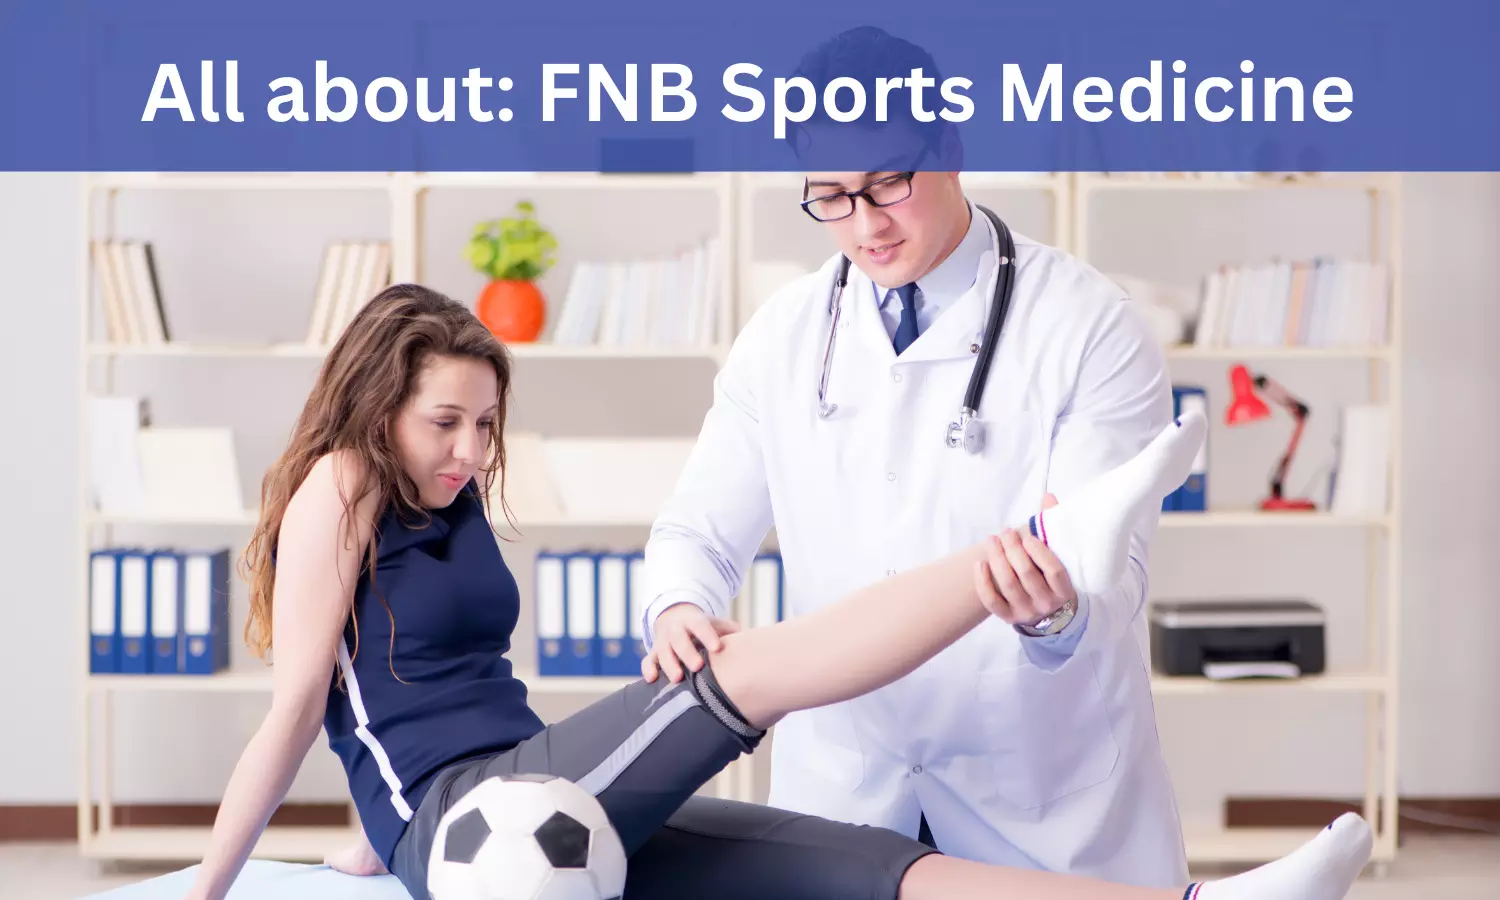 FNB Sports Medicine: Admissions, Medical Colleges, fees, Eligibility criteria details